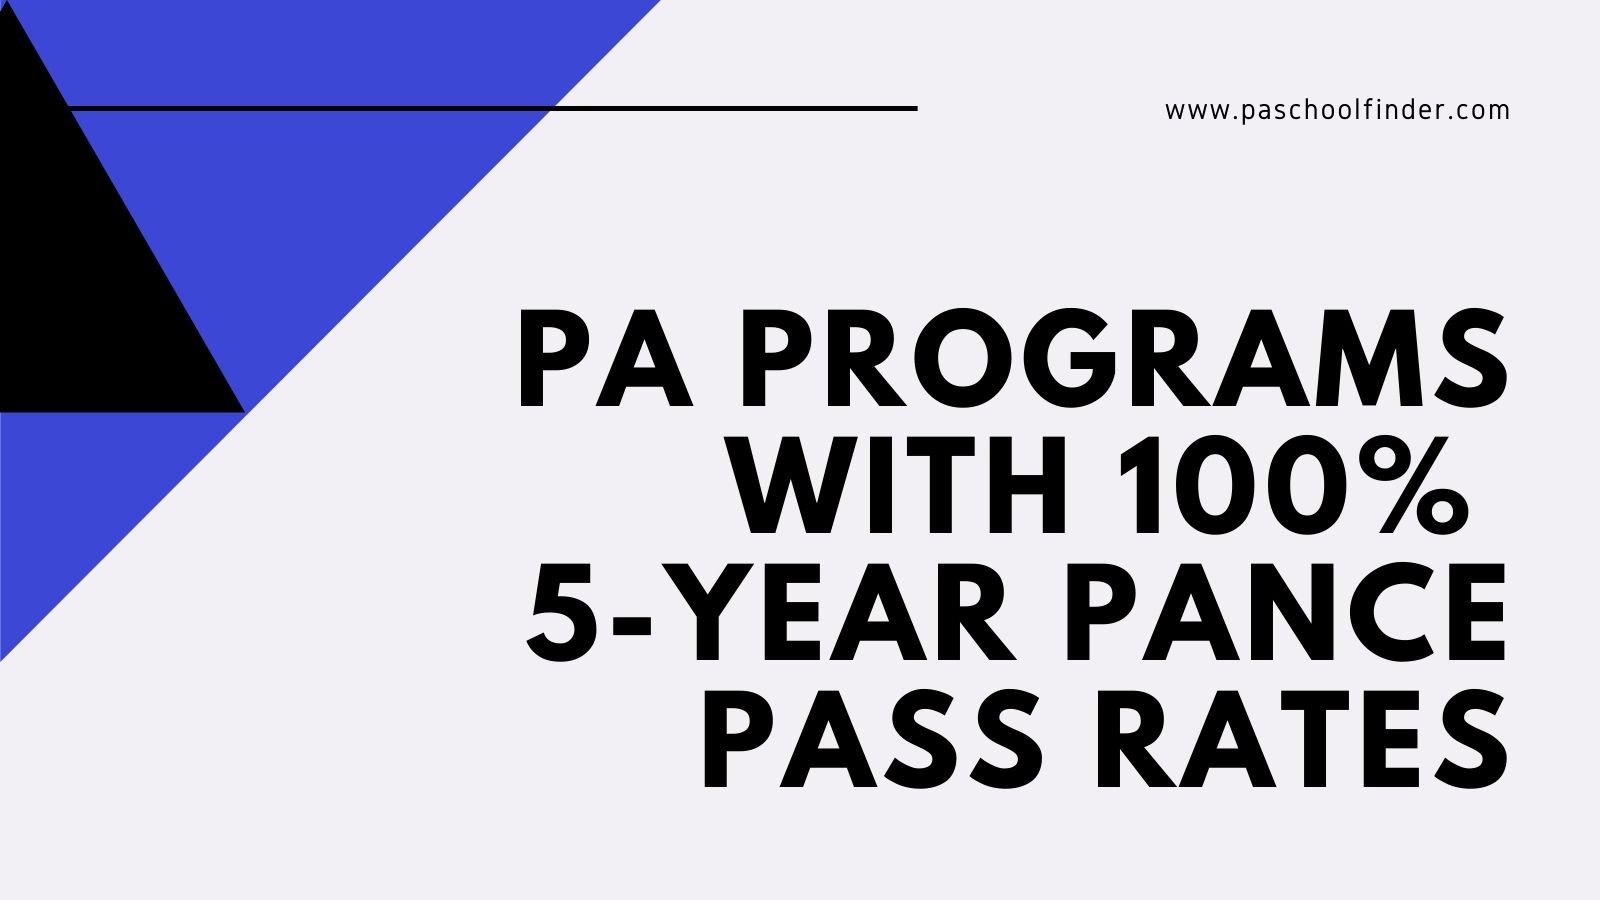 https://www.thepalife.com/wp-content/uploads/2020/10/PA-Schools-With-100-Percent-Five-Year-PANCE-Pass-Rates.jpg